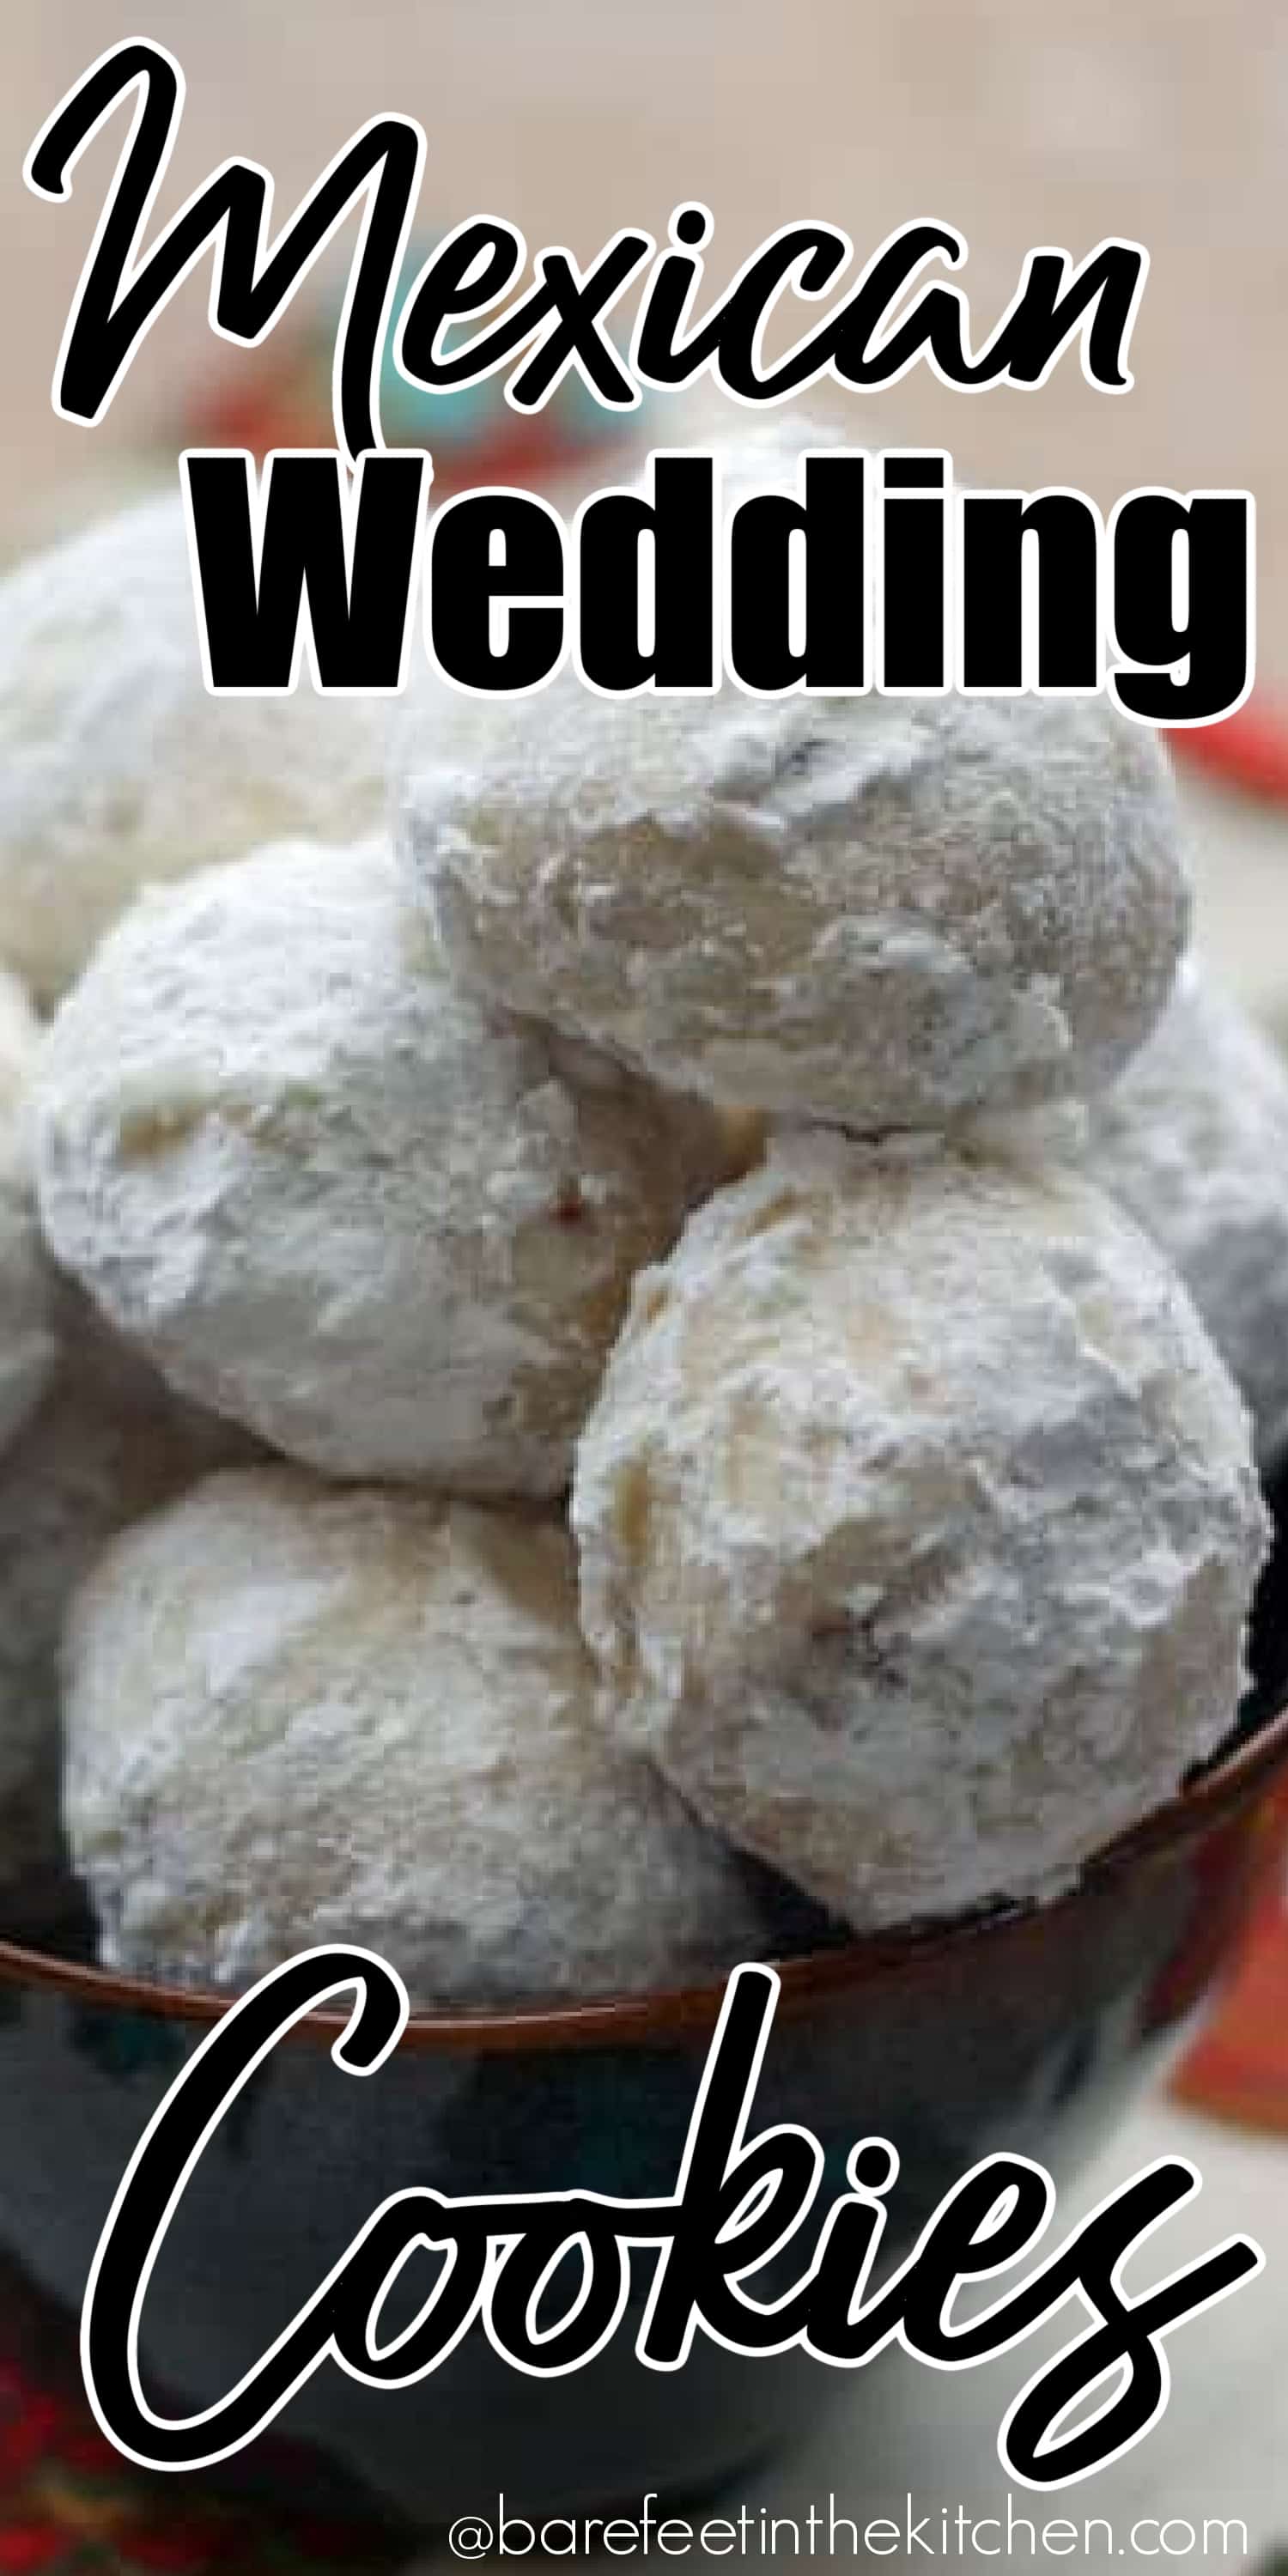 Mexican Wedding Cookies - Barefeet in the Kitchen